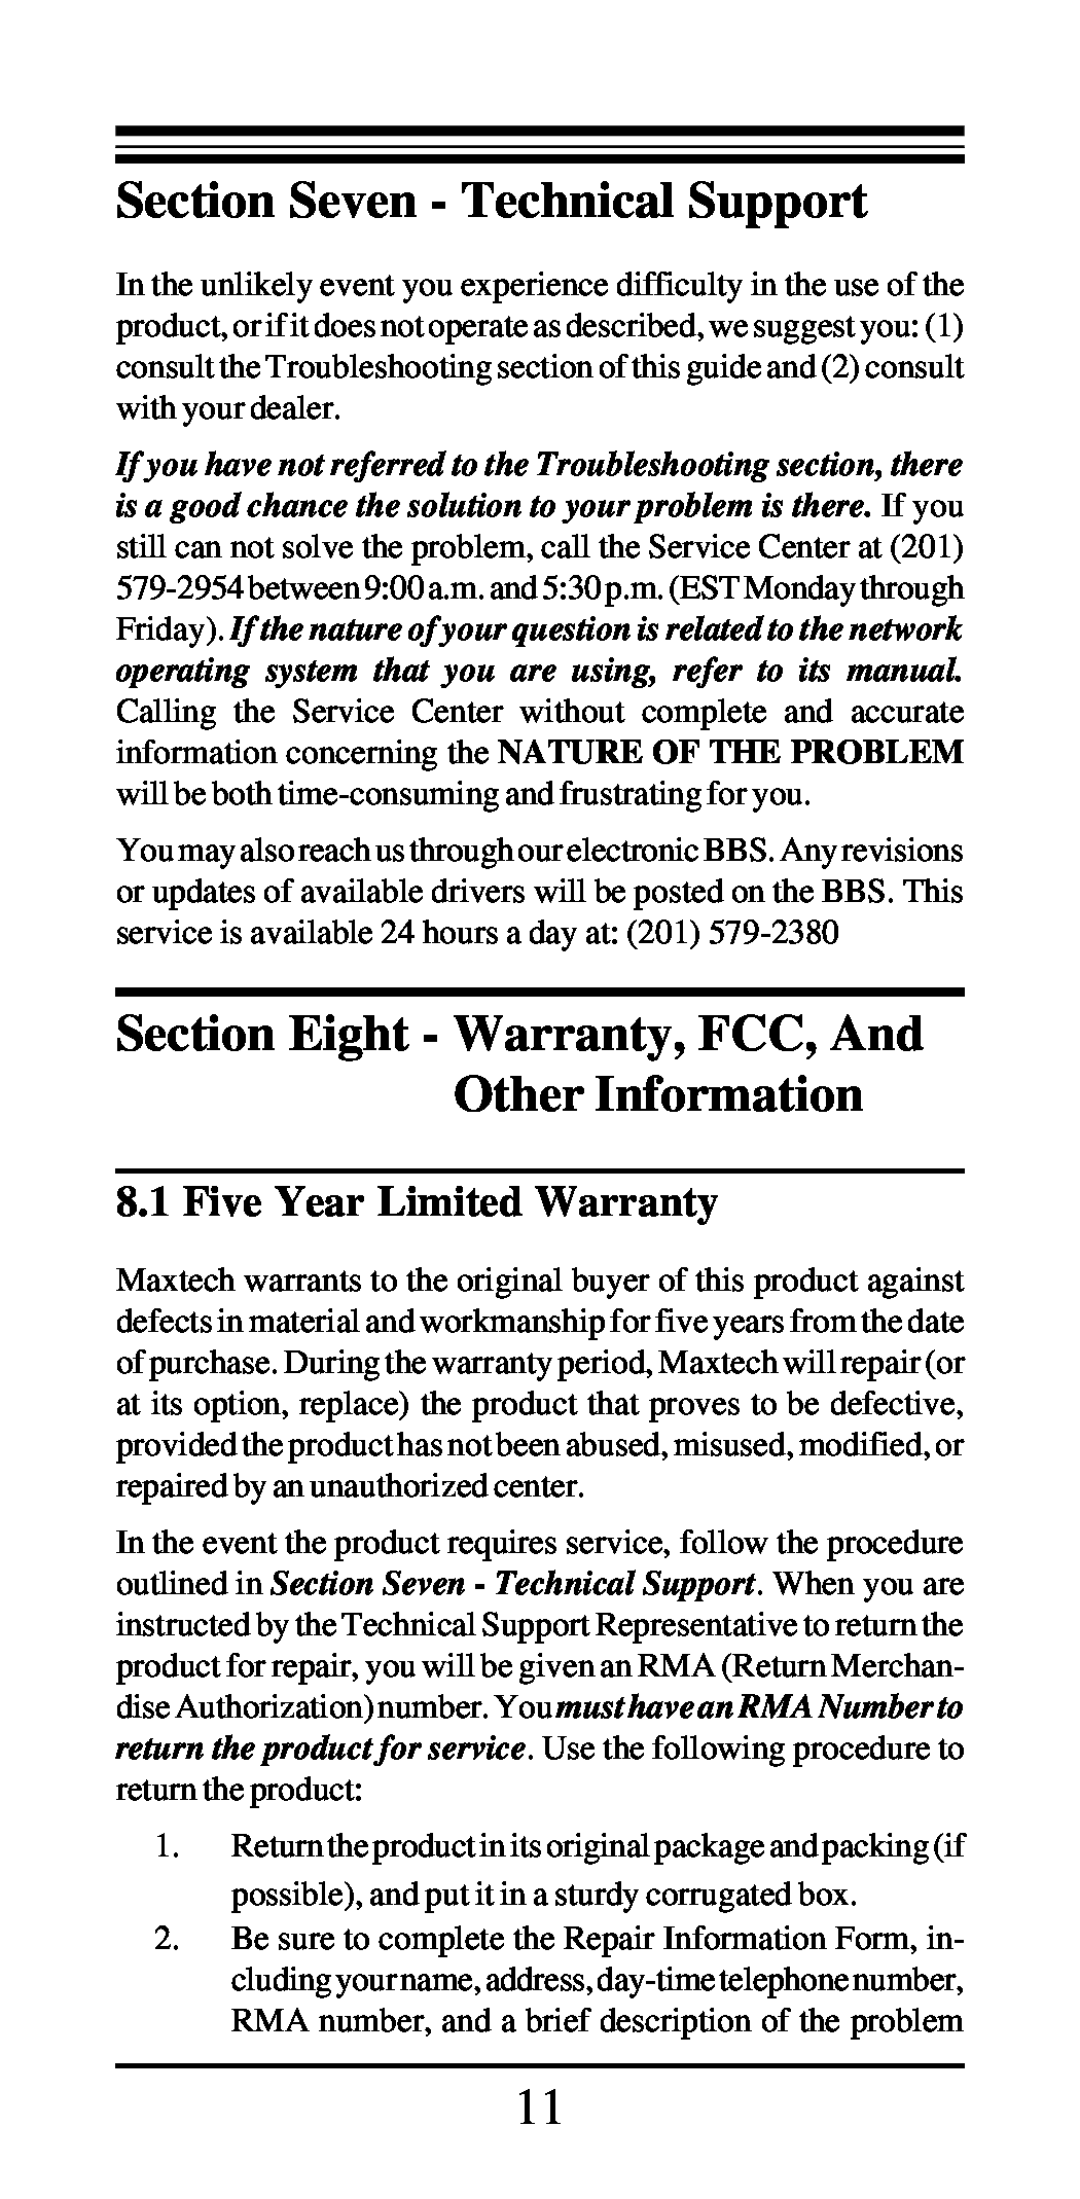 MaxTech PCN2000 Series manual Section Seven - Technical Support, Section Eight - Warranty, FCC, And Other Information 